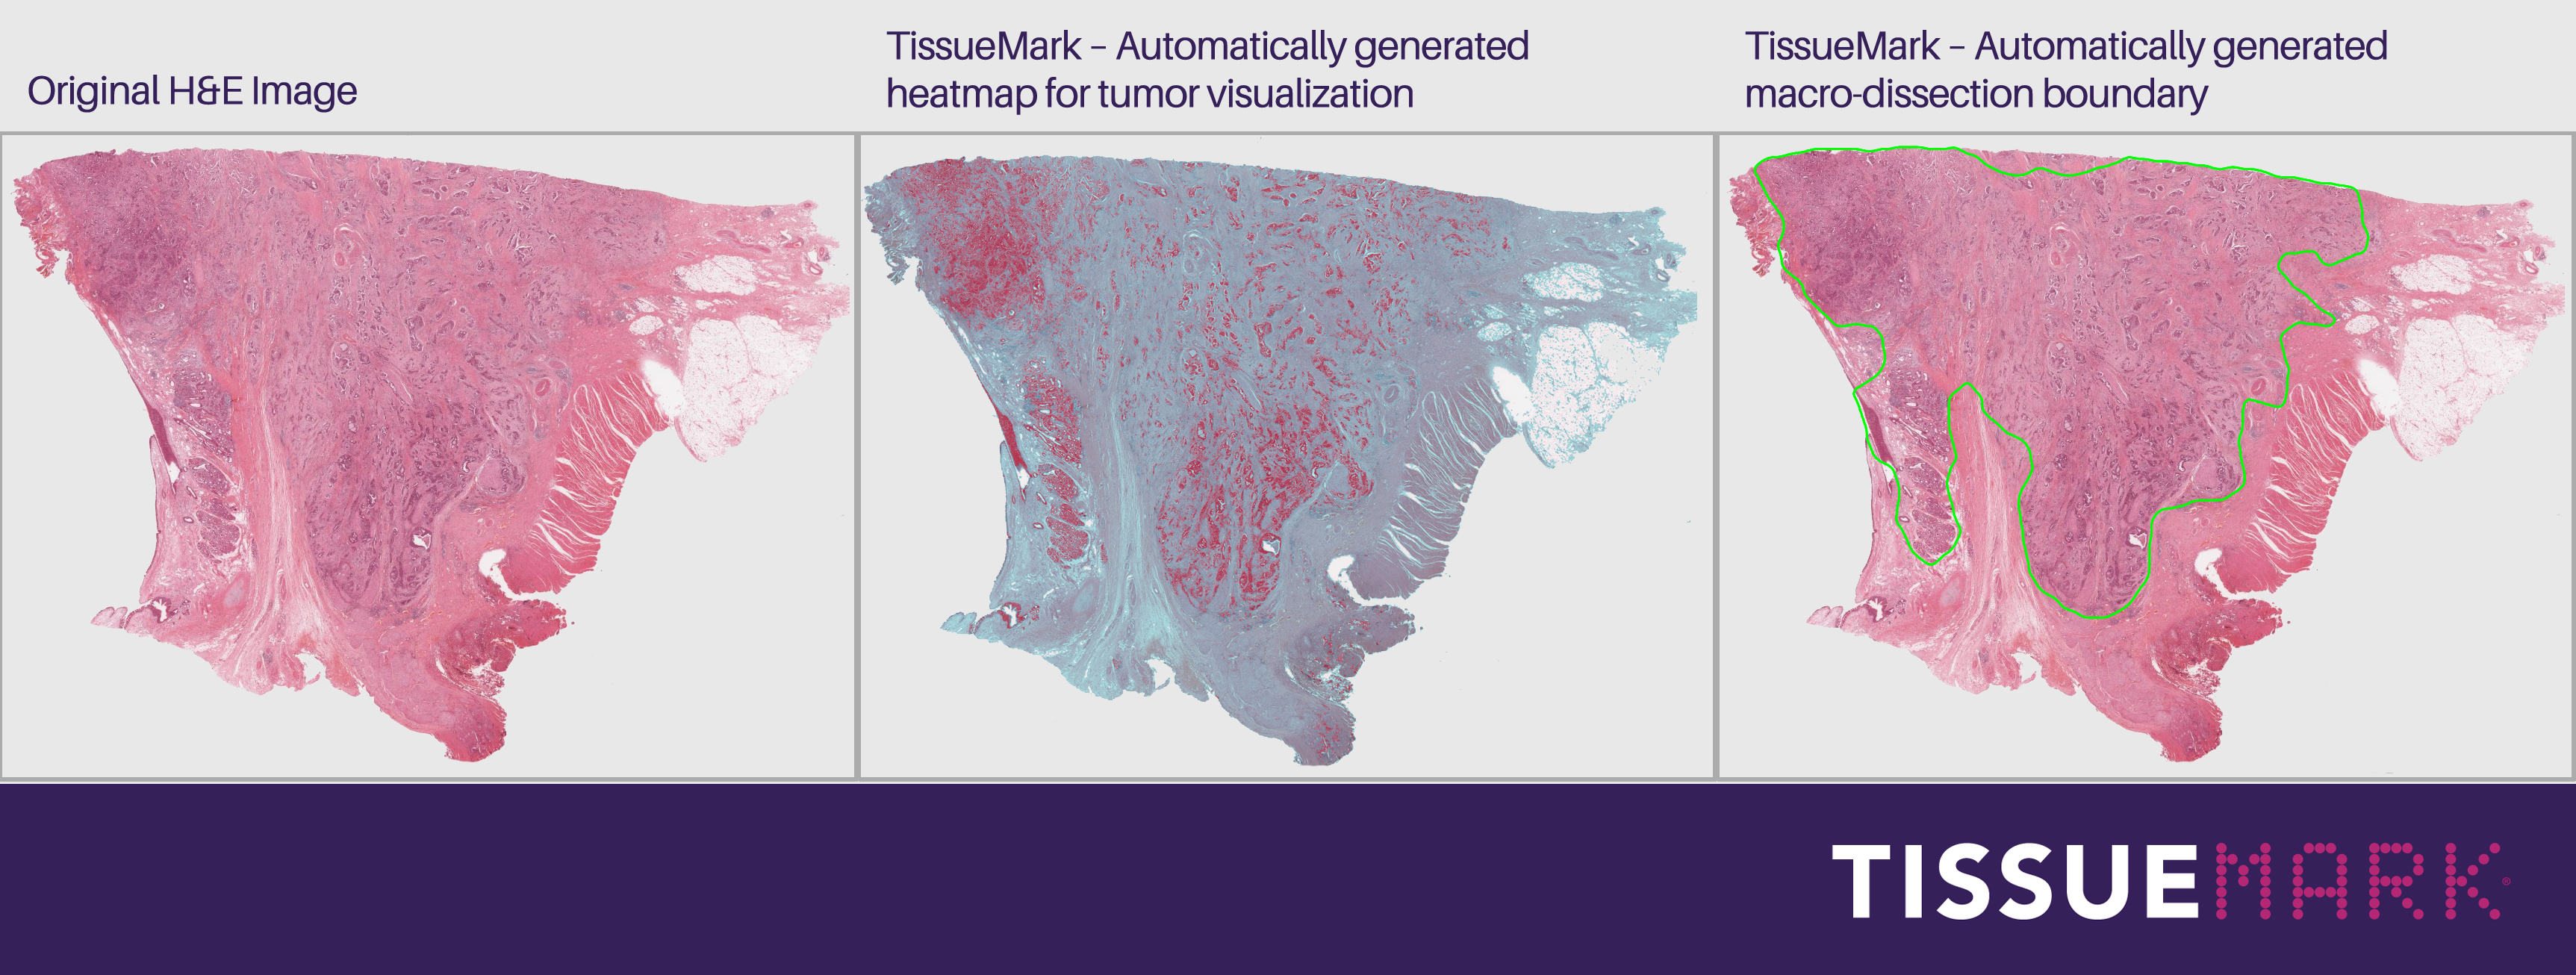 H&E virtual slide displayed next to TissueMark’s heatmap for tumor visualization and the automatically generated macro-dissection boundary